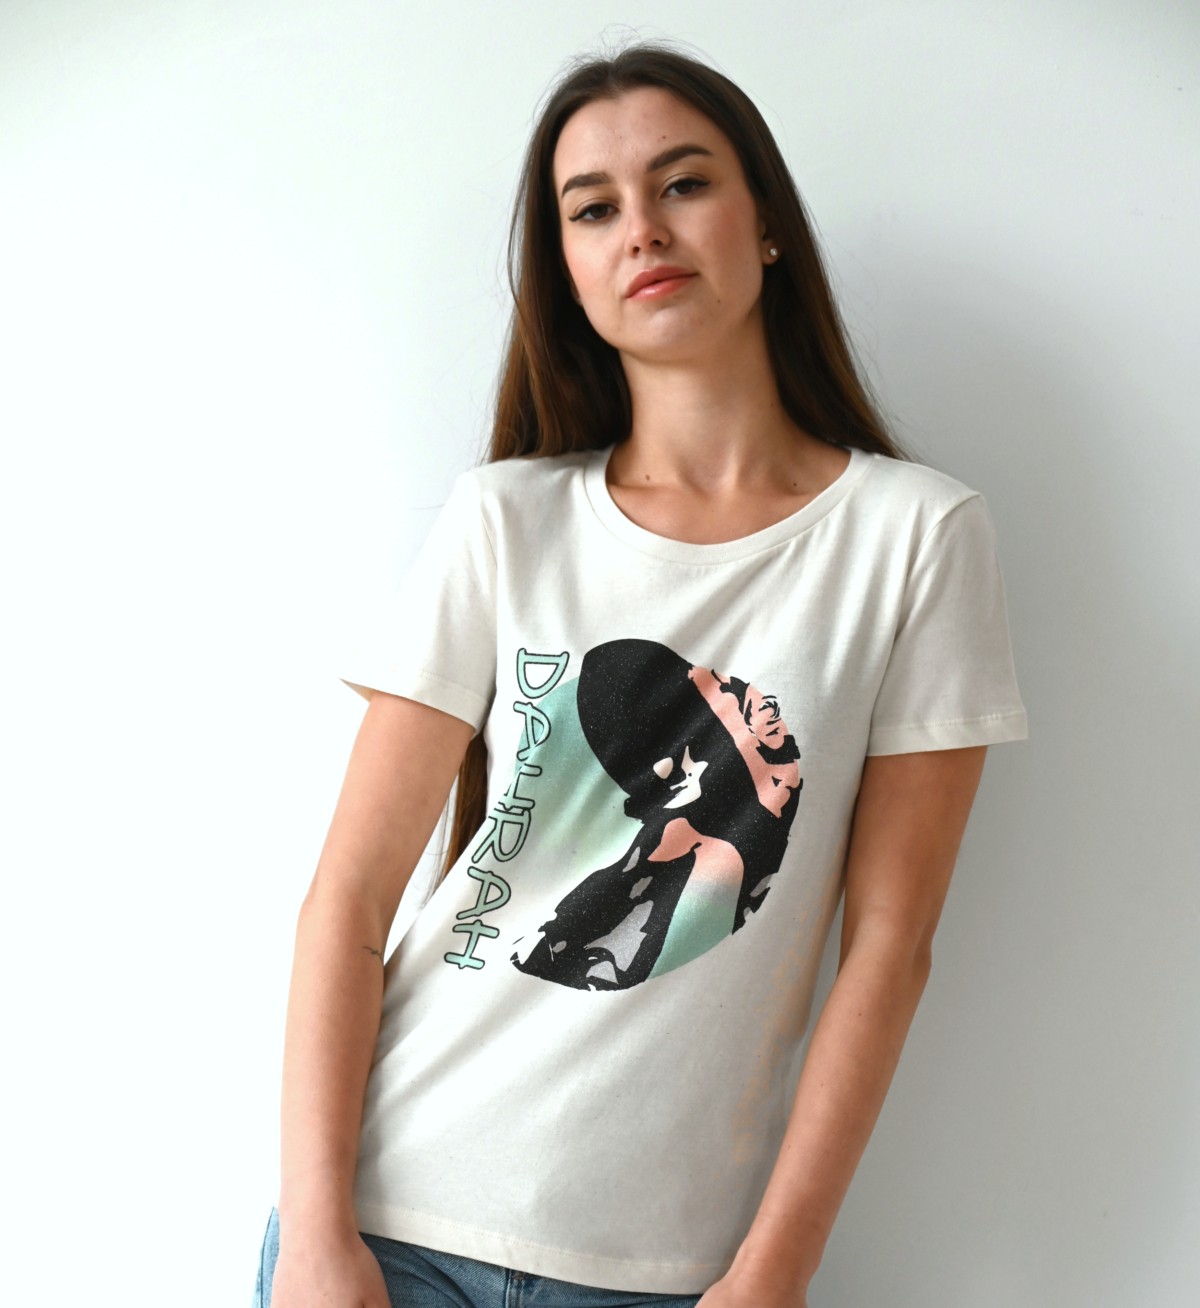 Organic cotton T-shirt with print of a beautiful confident lady with hat by Dahrah Darah Fashion.